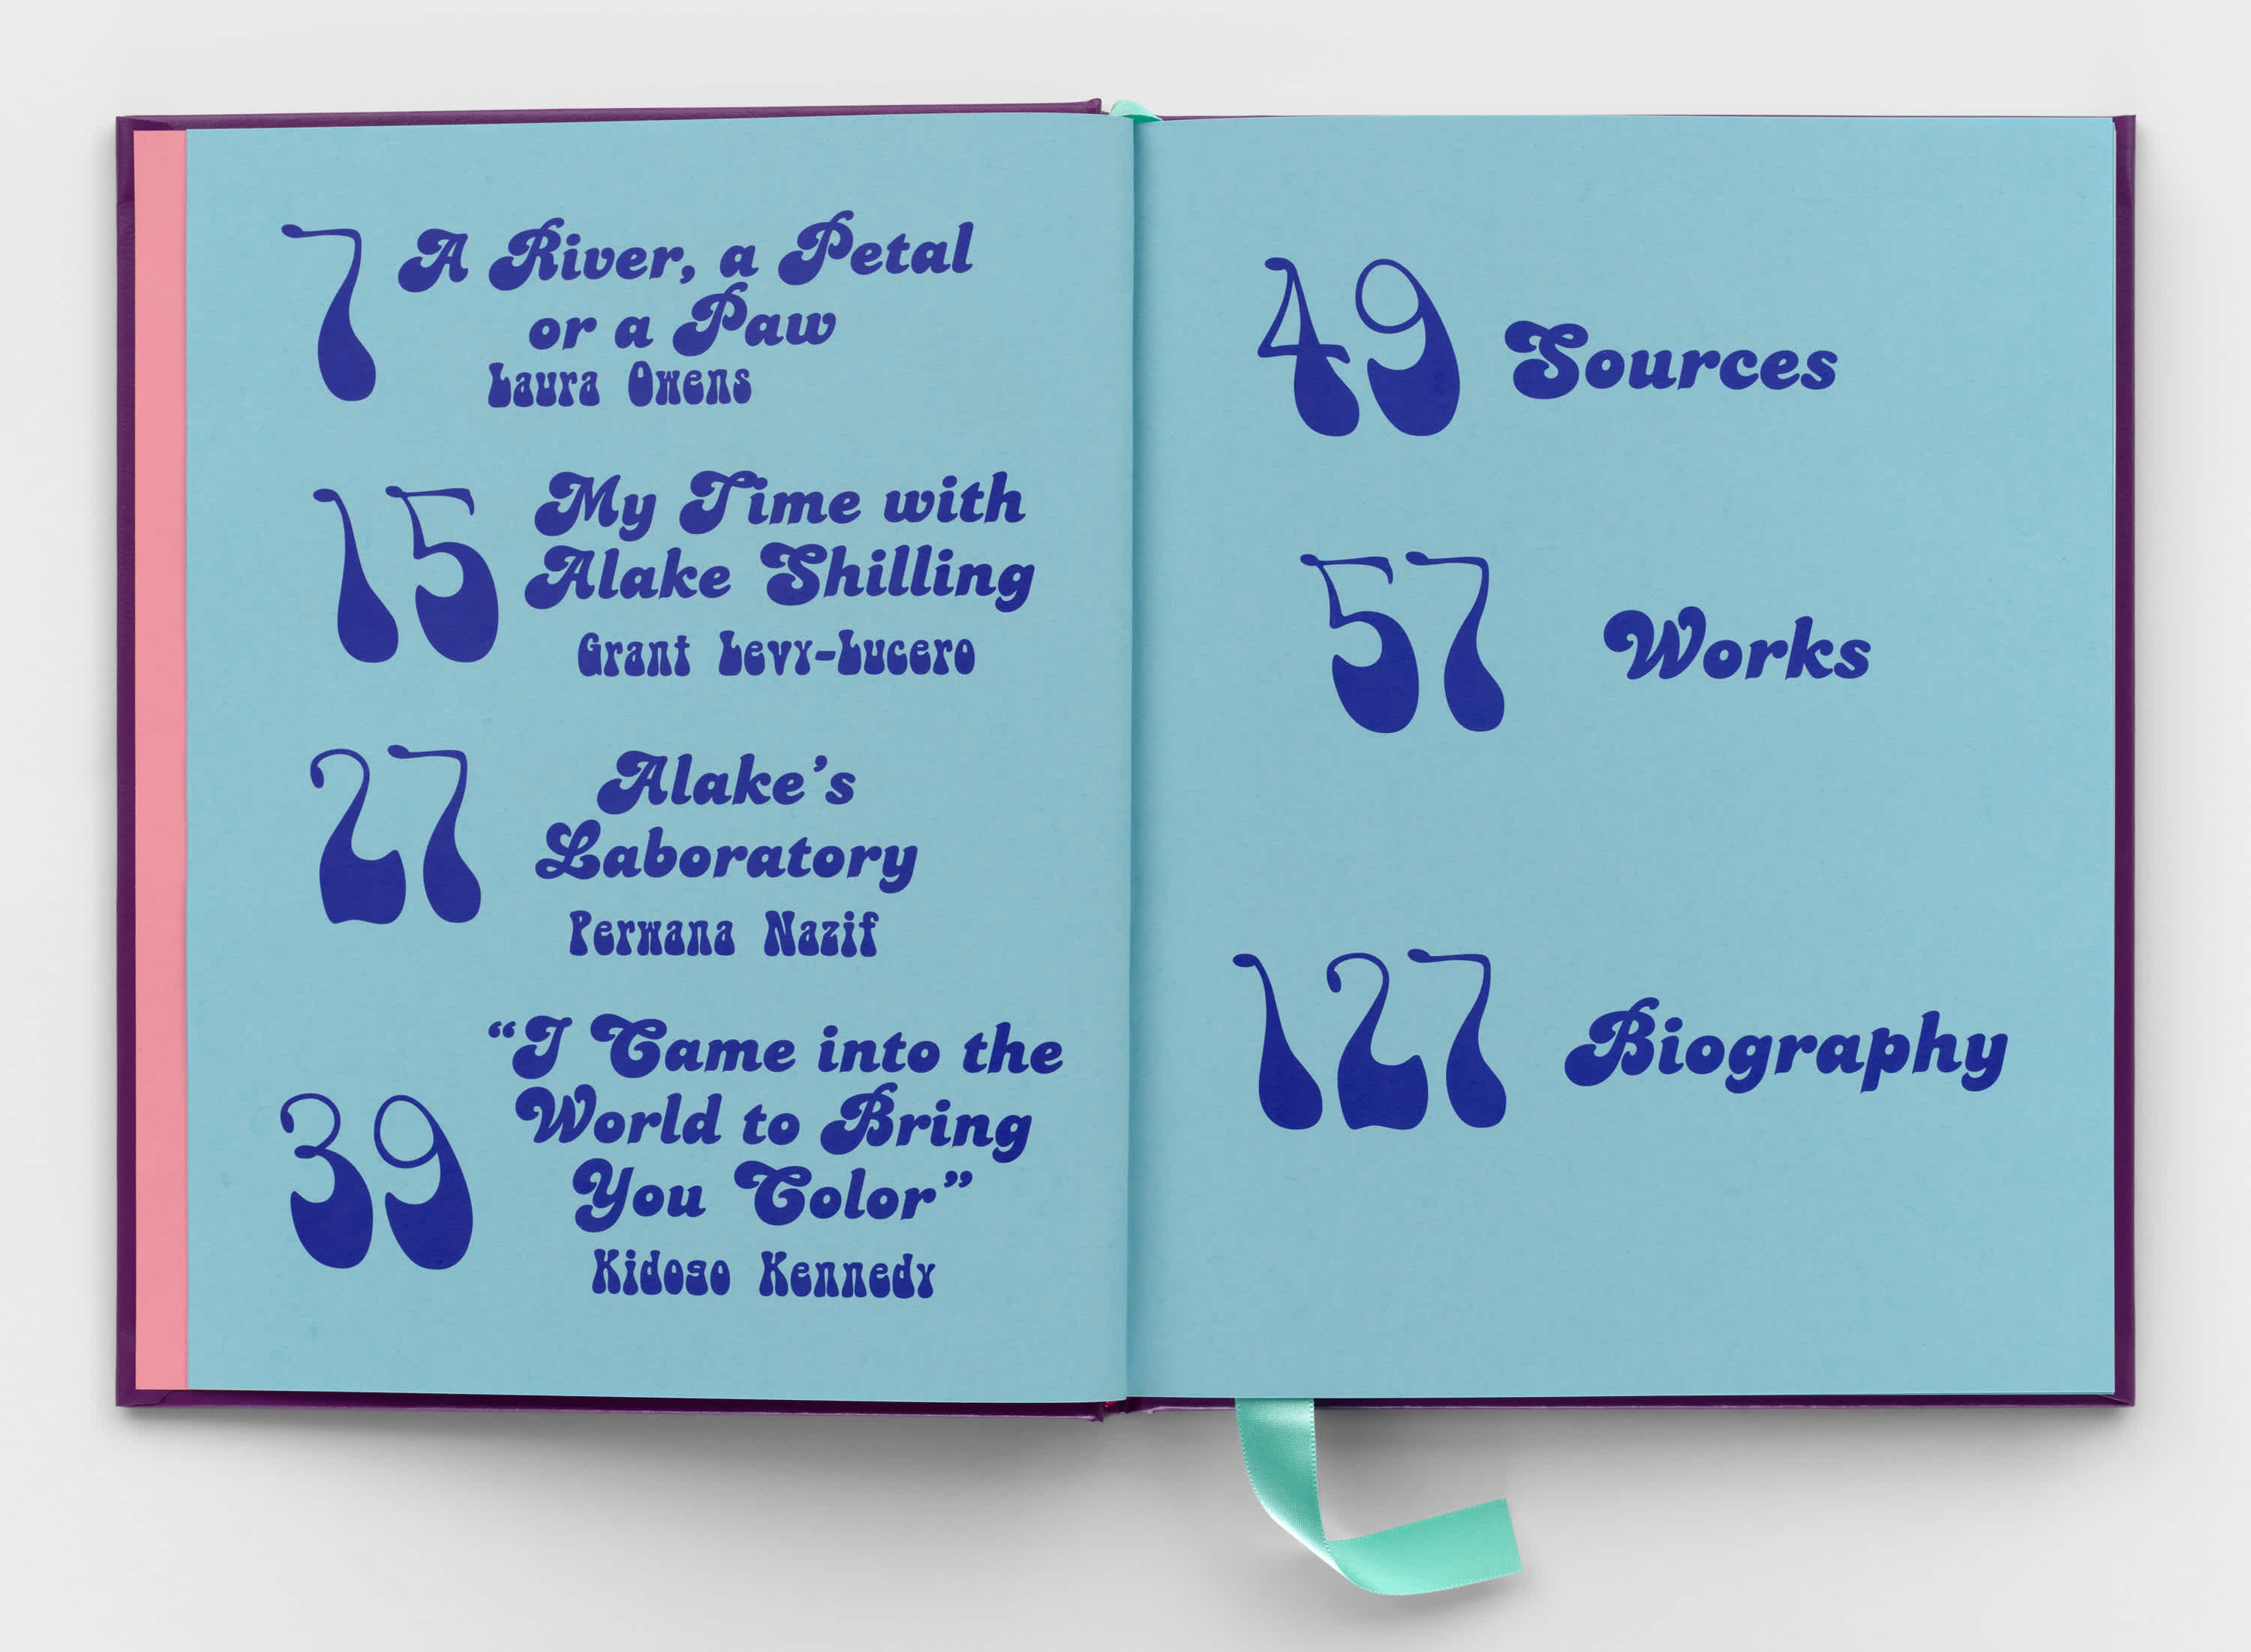 A book rests on a white background. It is opened to the table of contents page. The paper is light blue and the numbers and chapter titles are royal blue. The lettering is a soft, curly, psychedelic font.